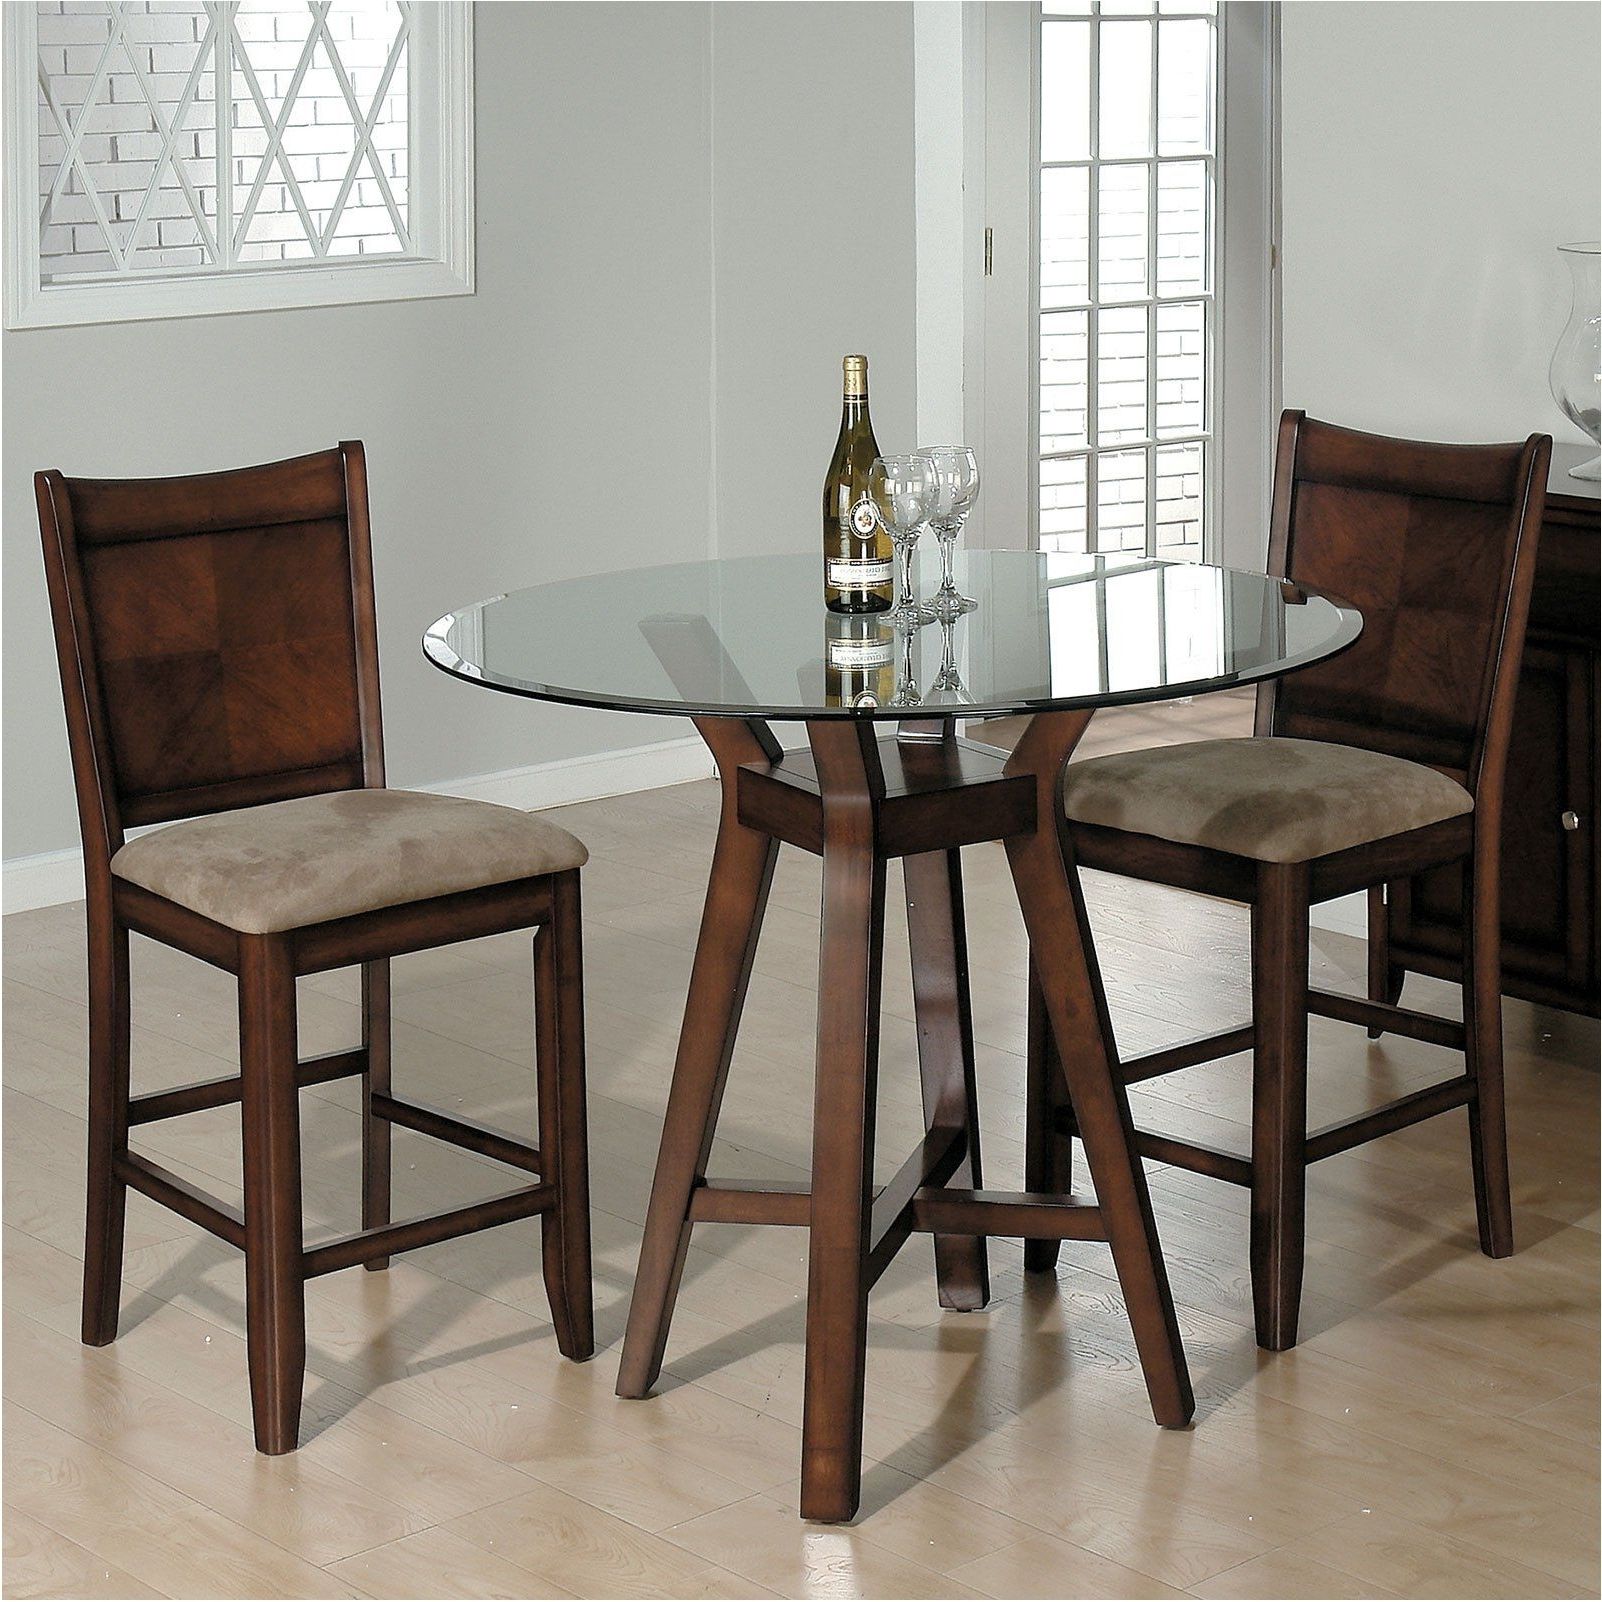 Most Popular Sensational Nice Small Dining Table Chairs With Small Glass Dining With Regard To Small Dining Tables And Chairs (View 12 of 25)